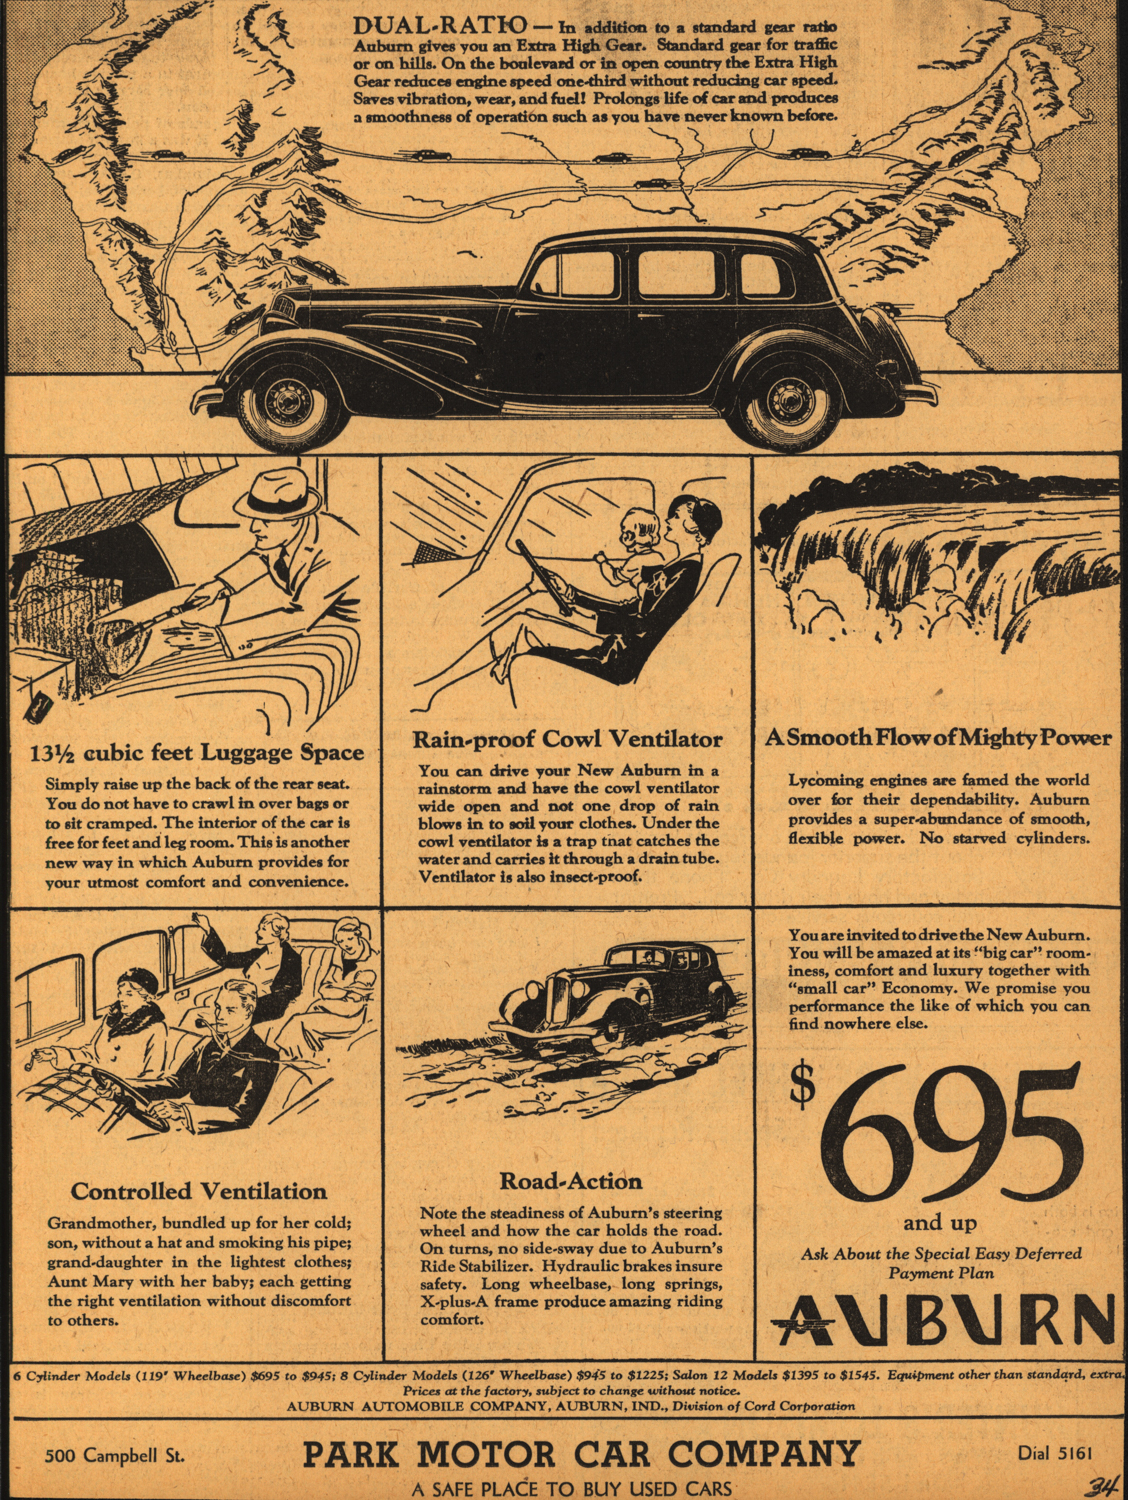 The Auburn line was reduced again in 1934, but the cars were a bargain for the quality they provided. 